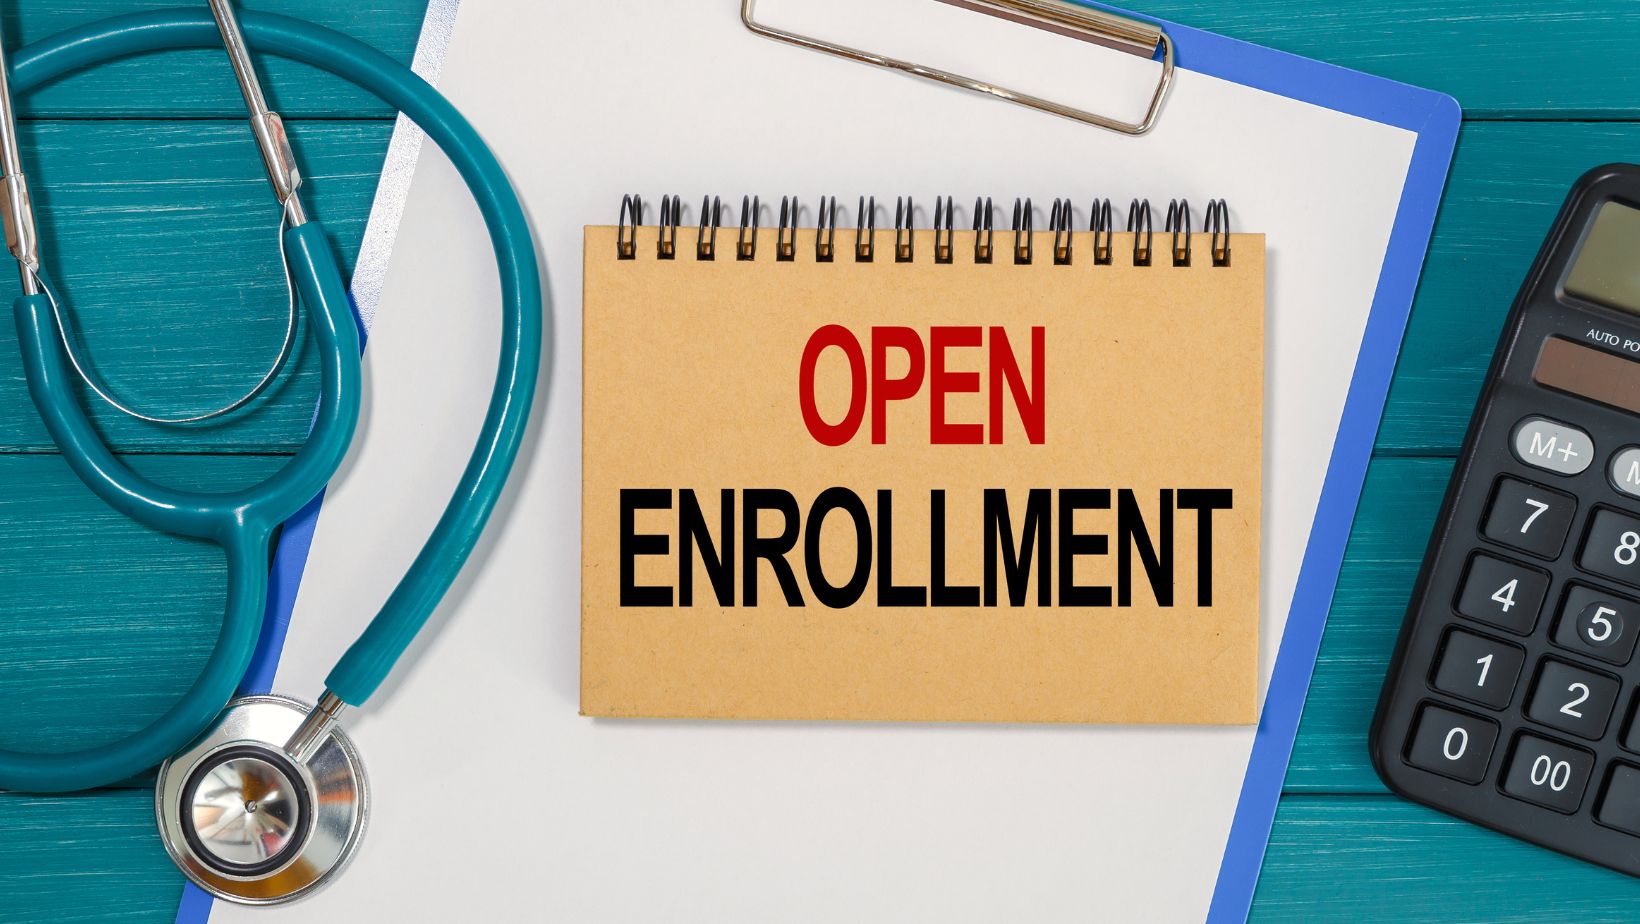 successful liability shift for enrolled card is required